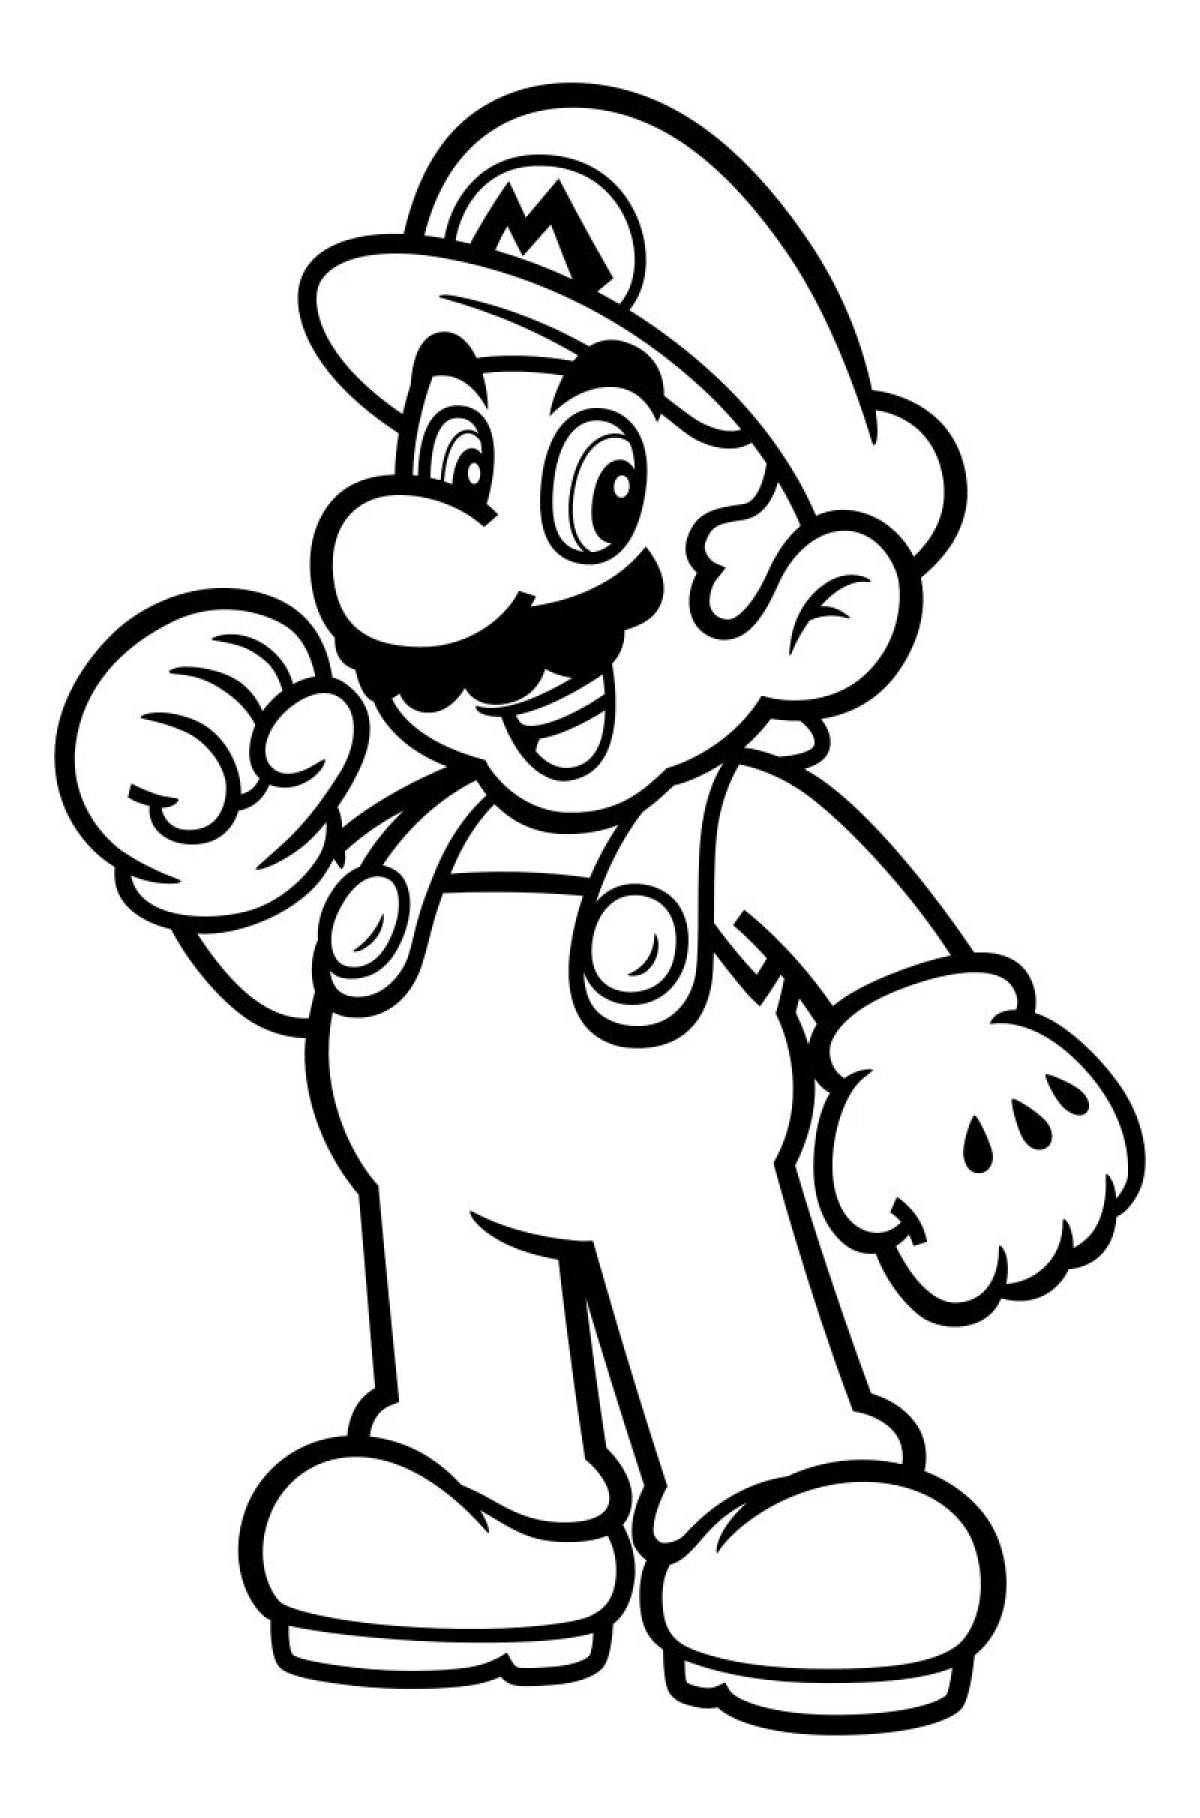 Mario for kids #16